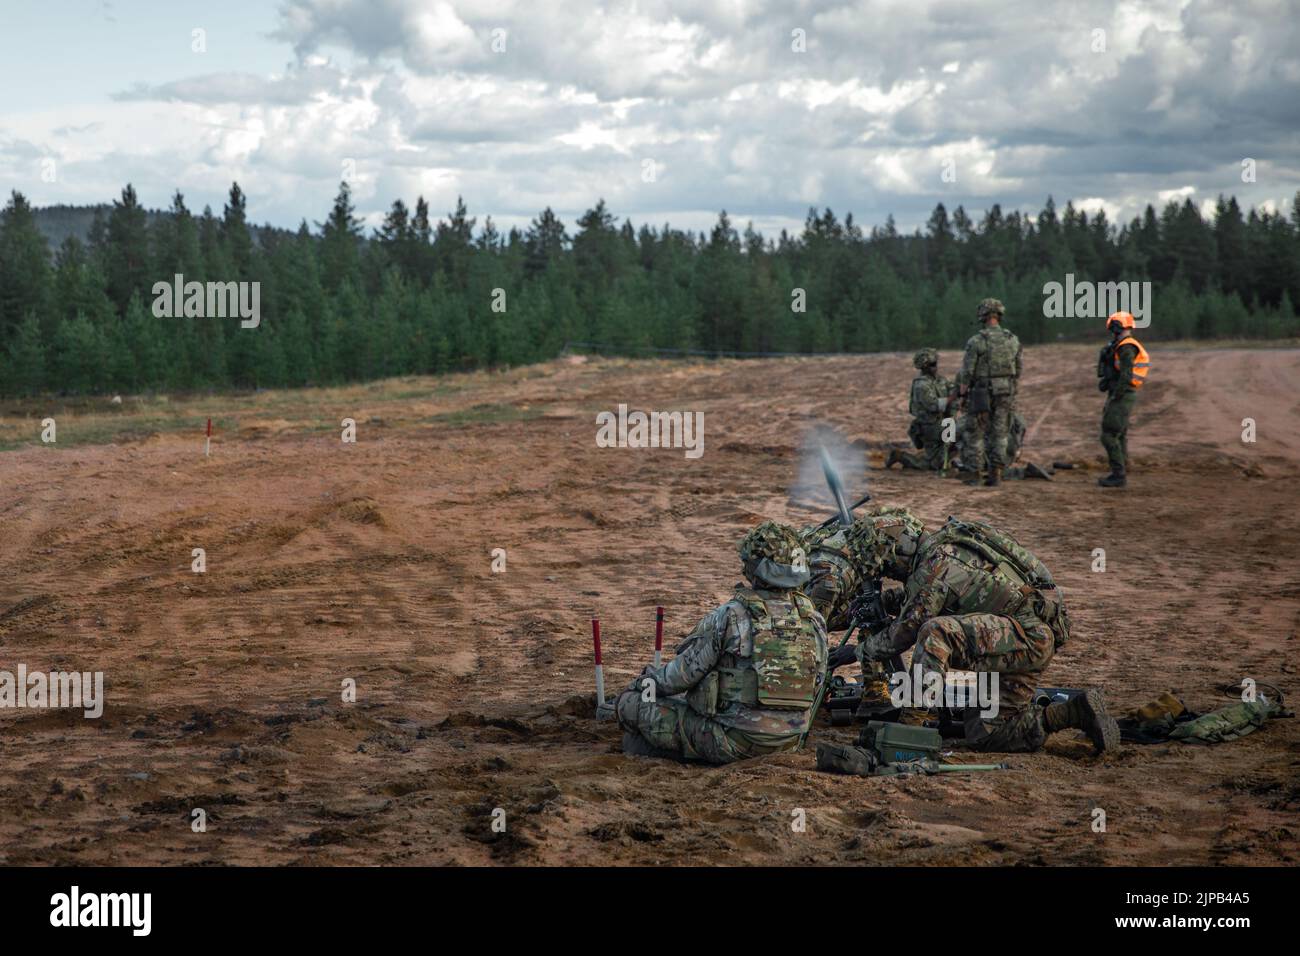 U.S. Soldiers assigned to Viper Company, 1st Battalion, 26th Infantry Regiment, 2nd Brigade Combat Team, 101st Airborne Division (Air Assault) fire an M224 60 mm mortar system as part of a fire mission in support of the company’s maneuver during a multinational live-fire exercise held at Rovaniemi Training Area, Finland, Aug. 11, 2022. The LFX was part of the Finnish Summer Exercise, where U.S. and Finnish troops had the opportunity to train together to amplify and strengthen the partnership and interoperability between the two nations. (U.S. Army National Guard photo by Sgt. Agustín Montañez) Stock Photo